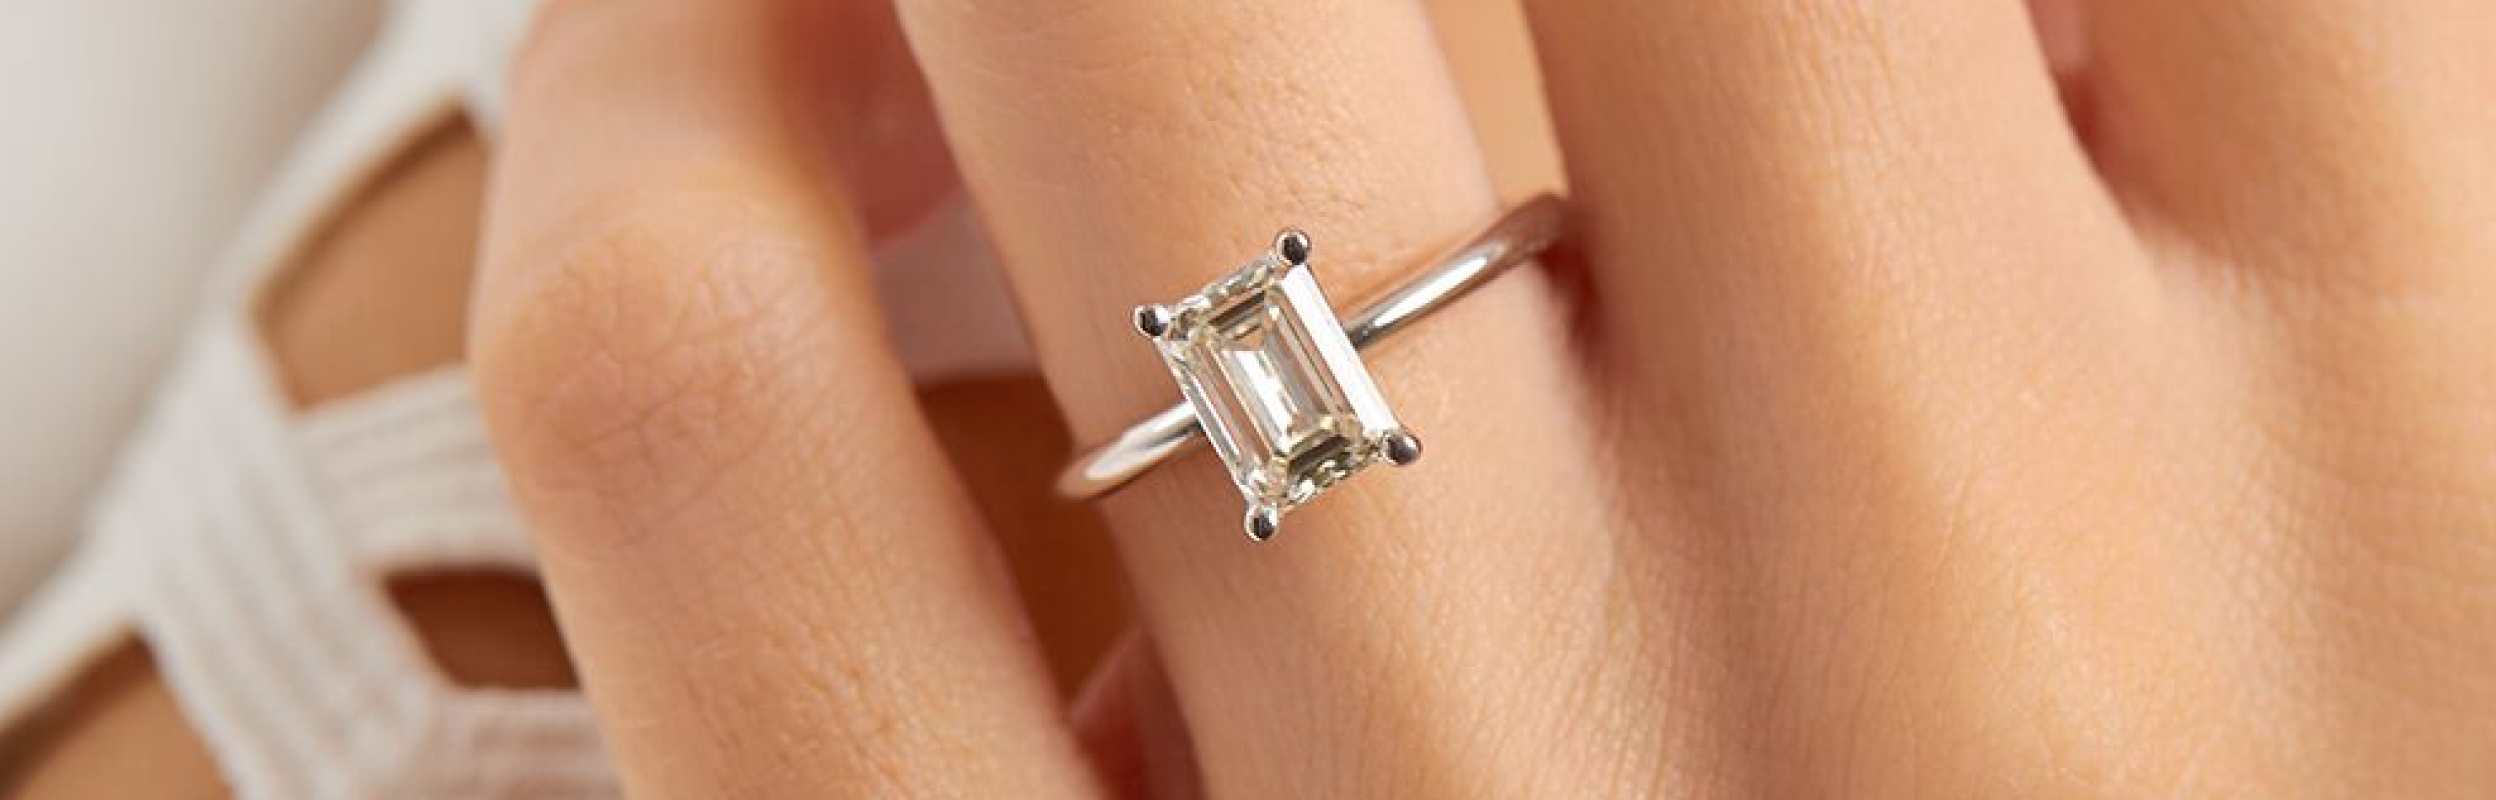 emerald cut diamond engagement ring in white gold